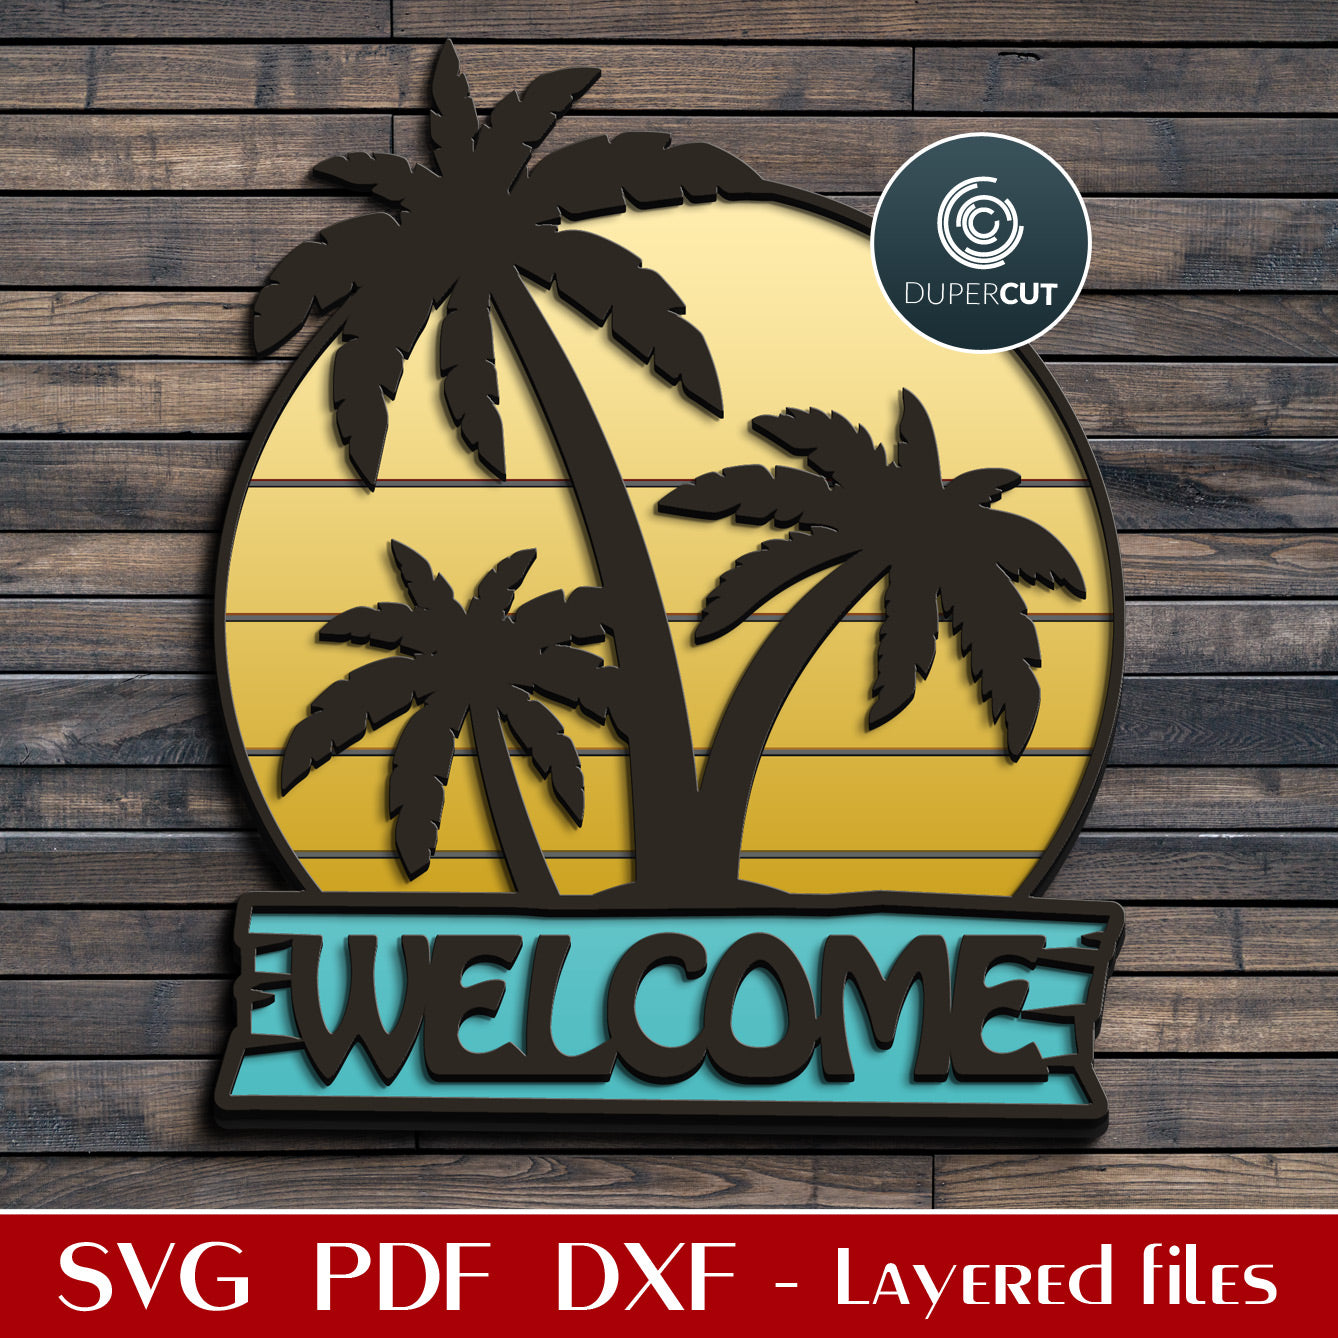 Beach palm welcome sign - personalized add custom text  - SVG DXF layered cutting files for Glowforge, Cricut, Silhouette, CNC plasma machines pattern by DuperCut